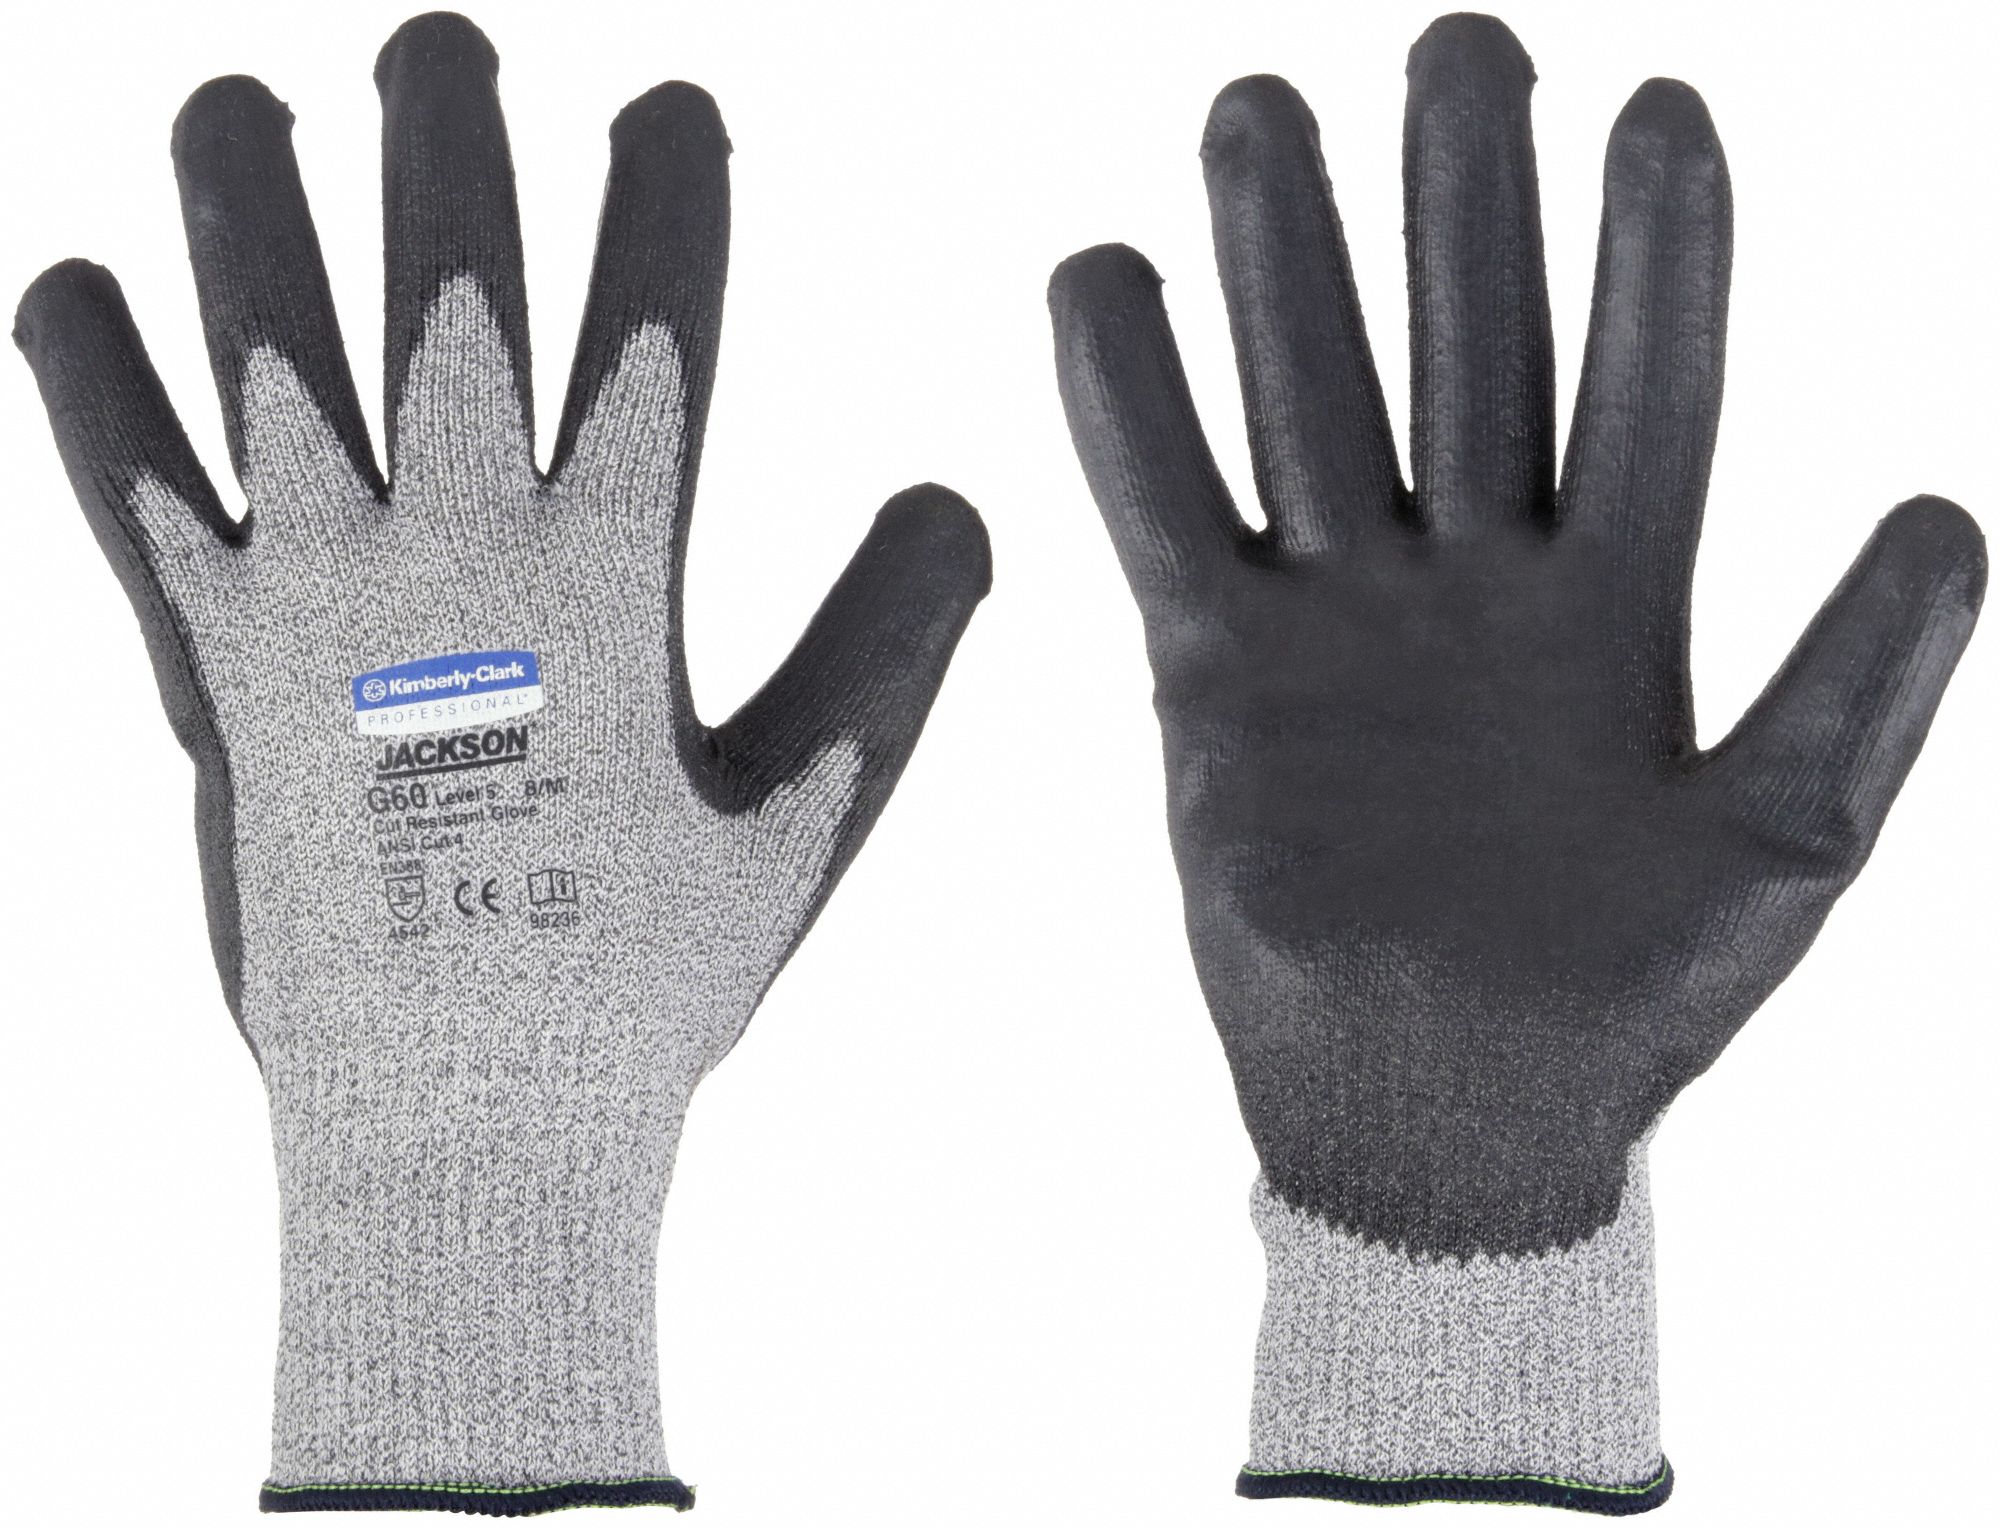 JACKSON SAFETY CUT-RESISTANT GLOVES, L (9), ANSI CUT LEVEL A4, DIPPED PALM,  PUR - Knit Cut-Resistant Gloves - KMB98237